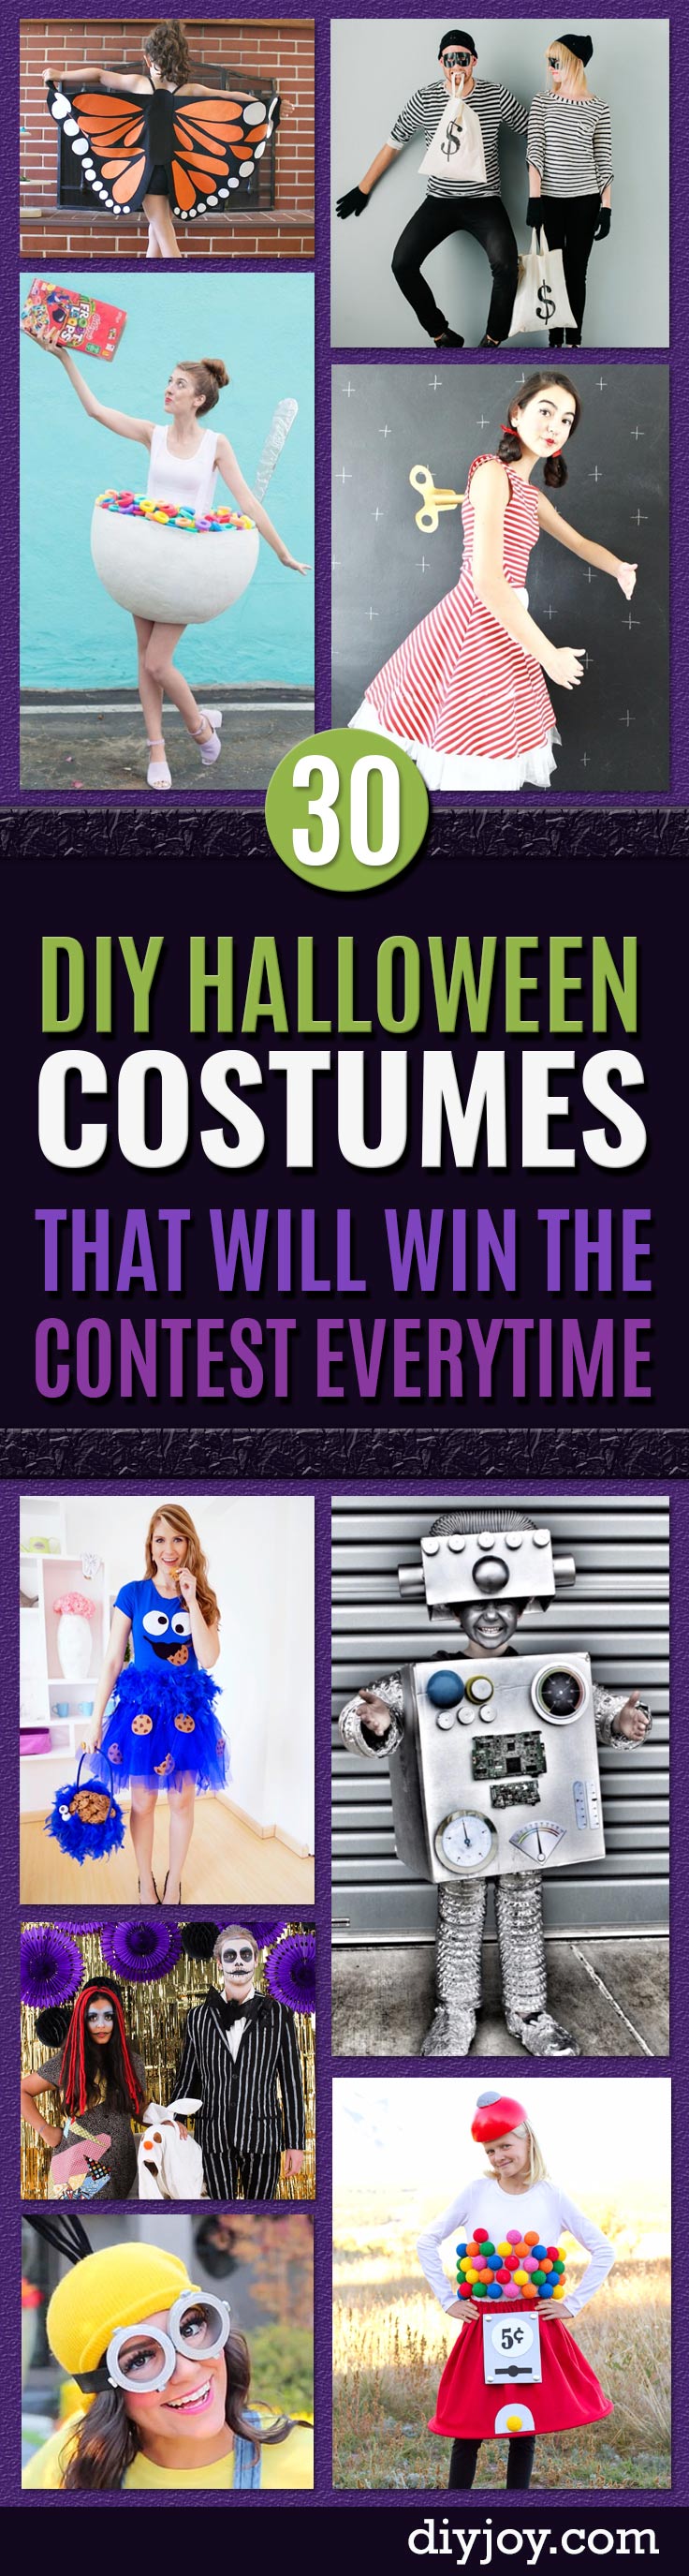 30 Halloween Costumes That Will Win The Contest Every Time